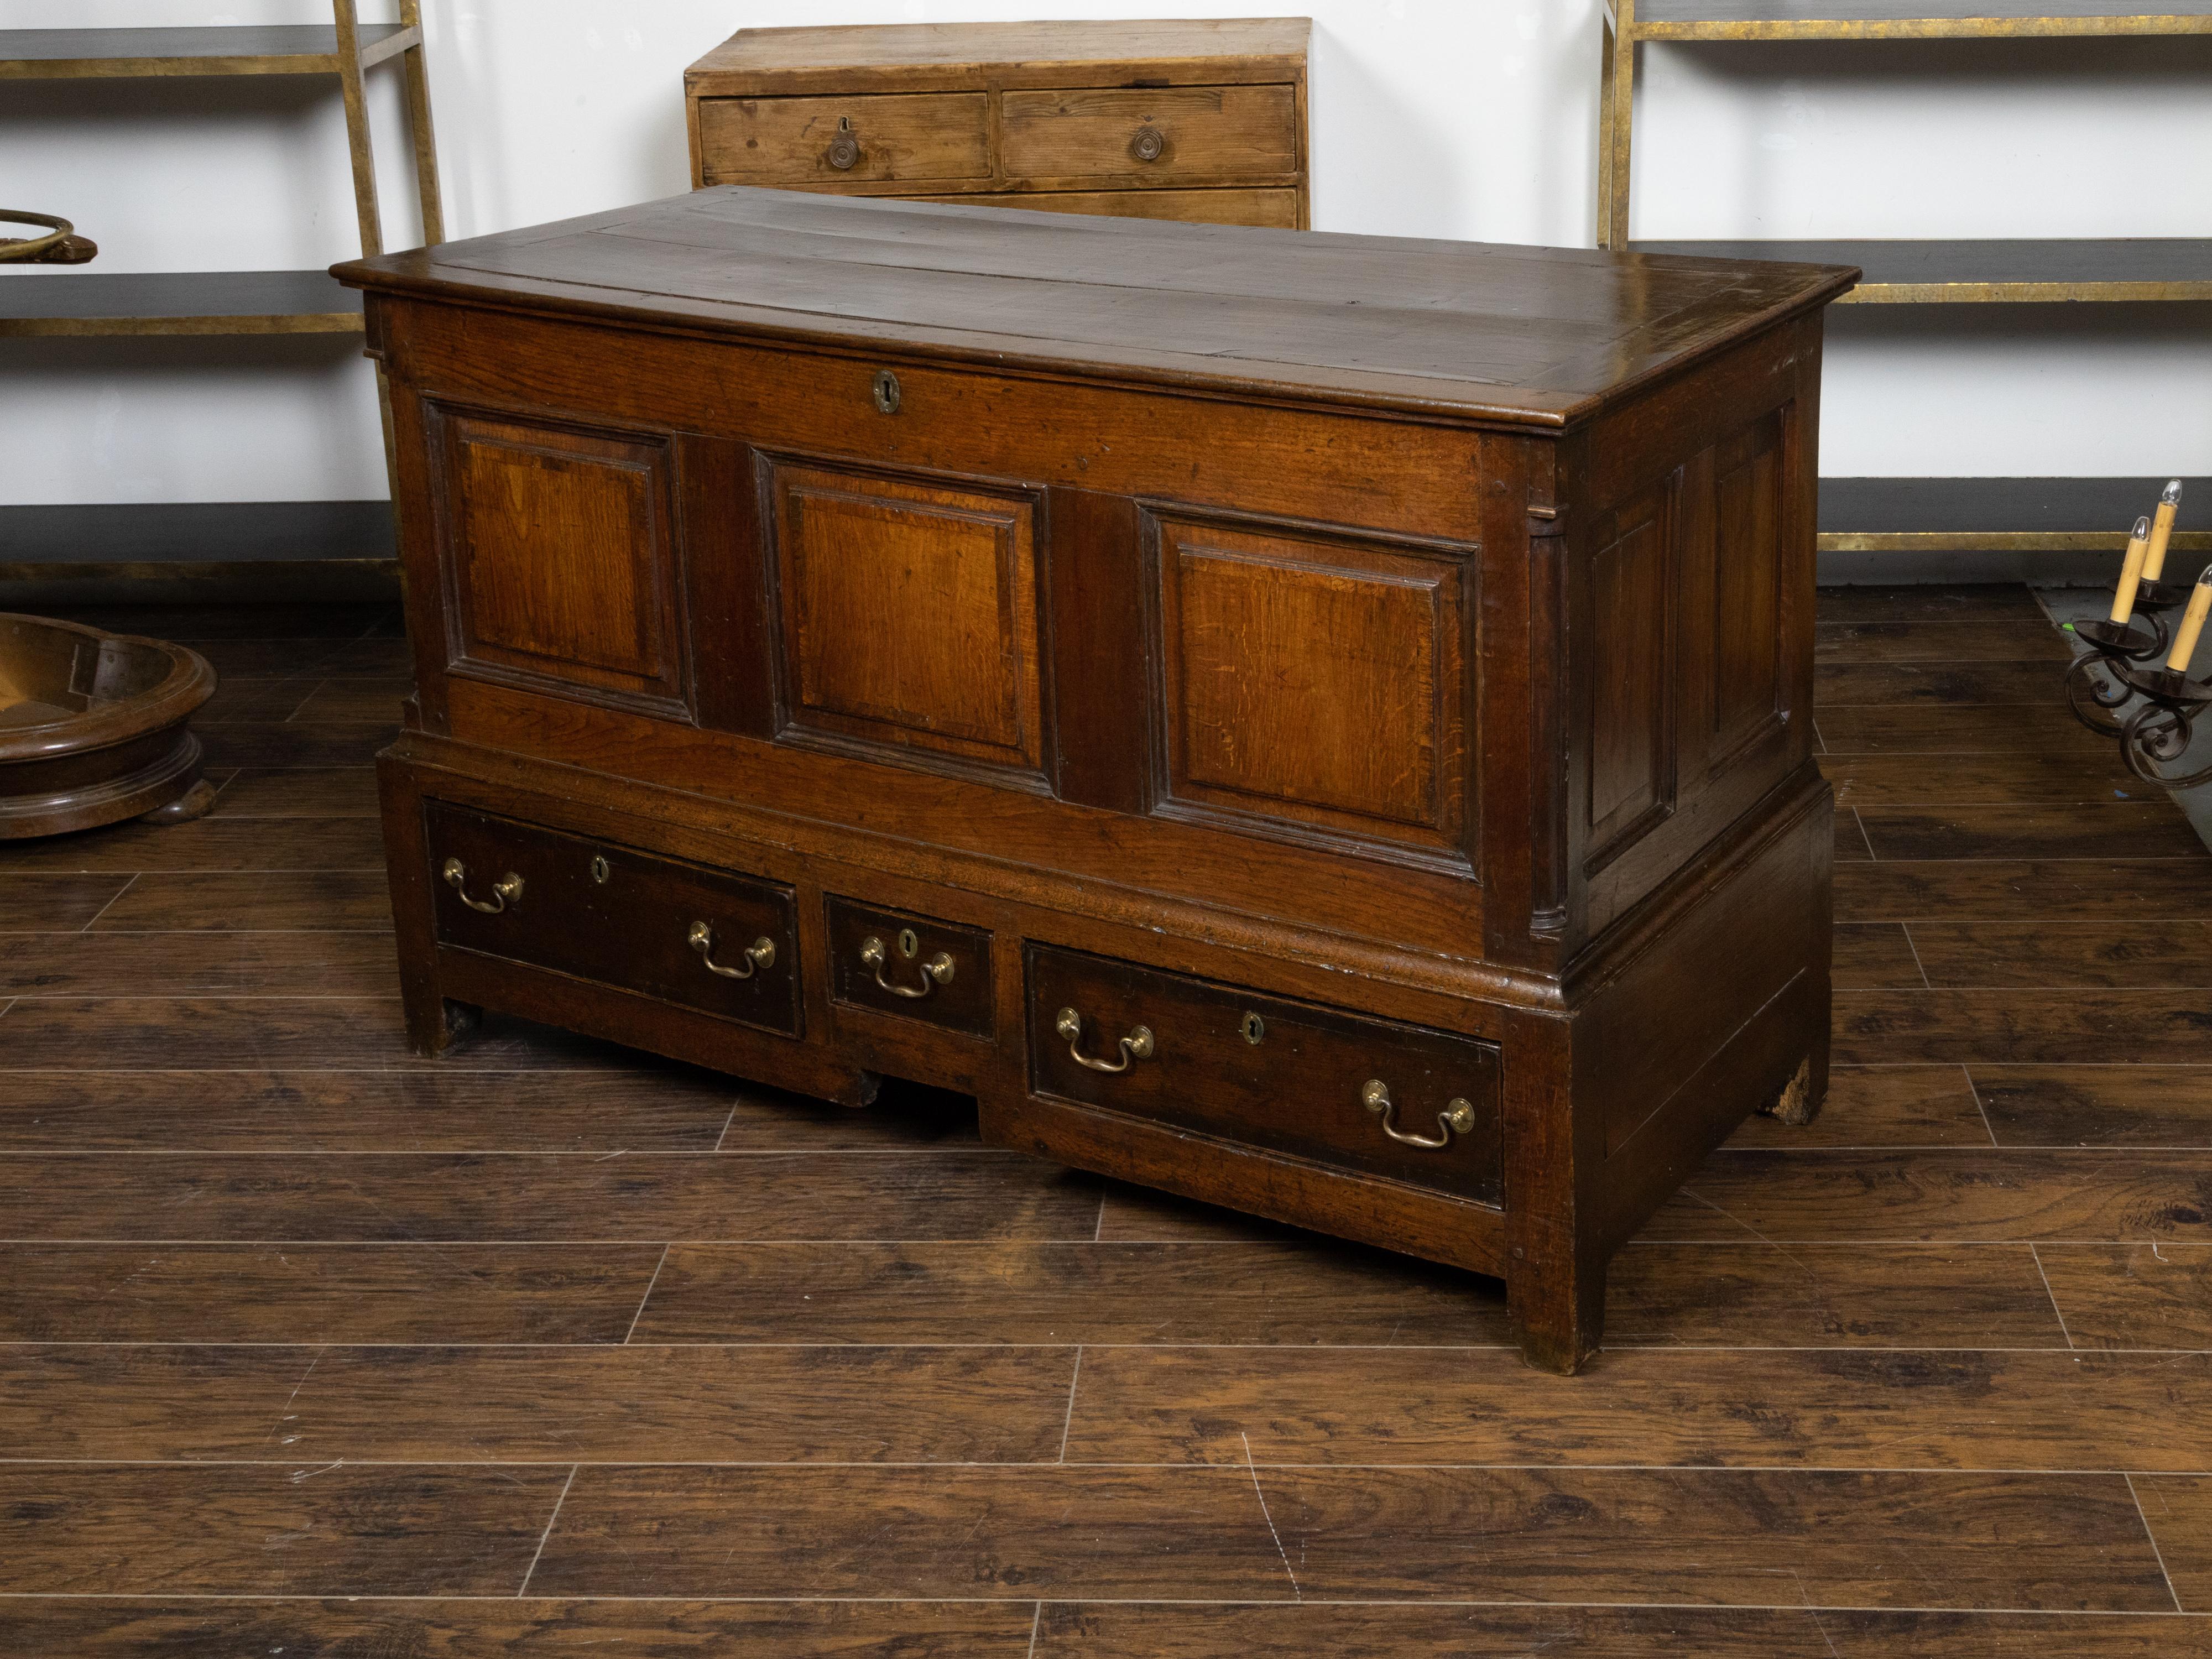 19th Century English Georgian Period 1800s Oak Mule Chest with Lift Top and Three Drawers For Sale